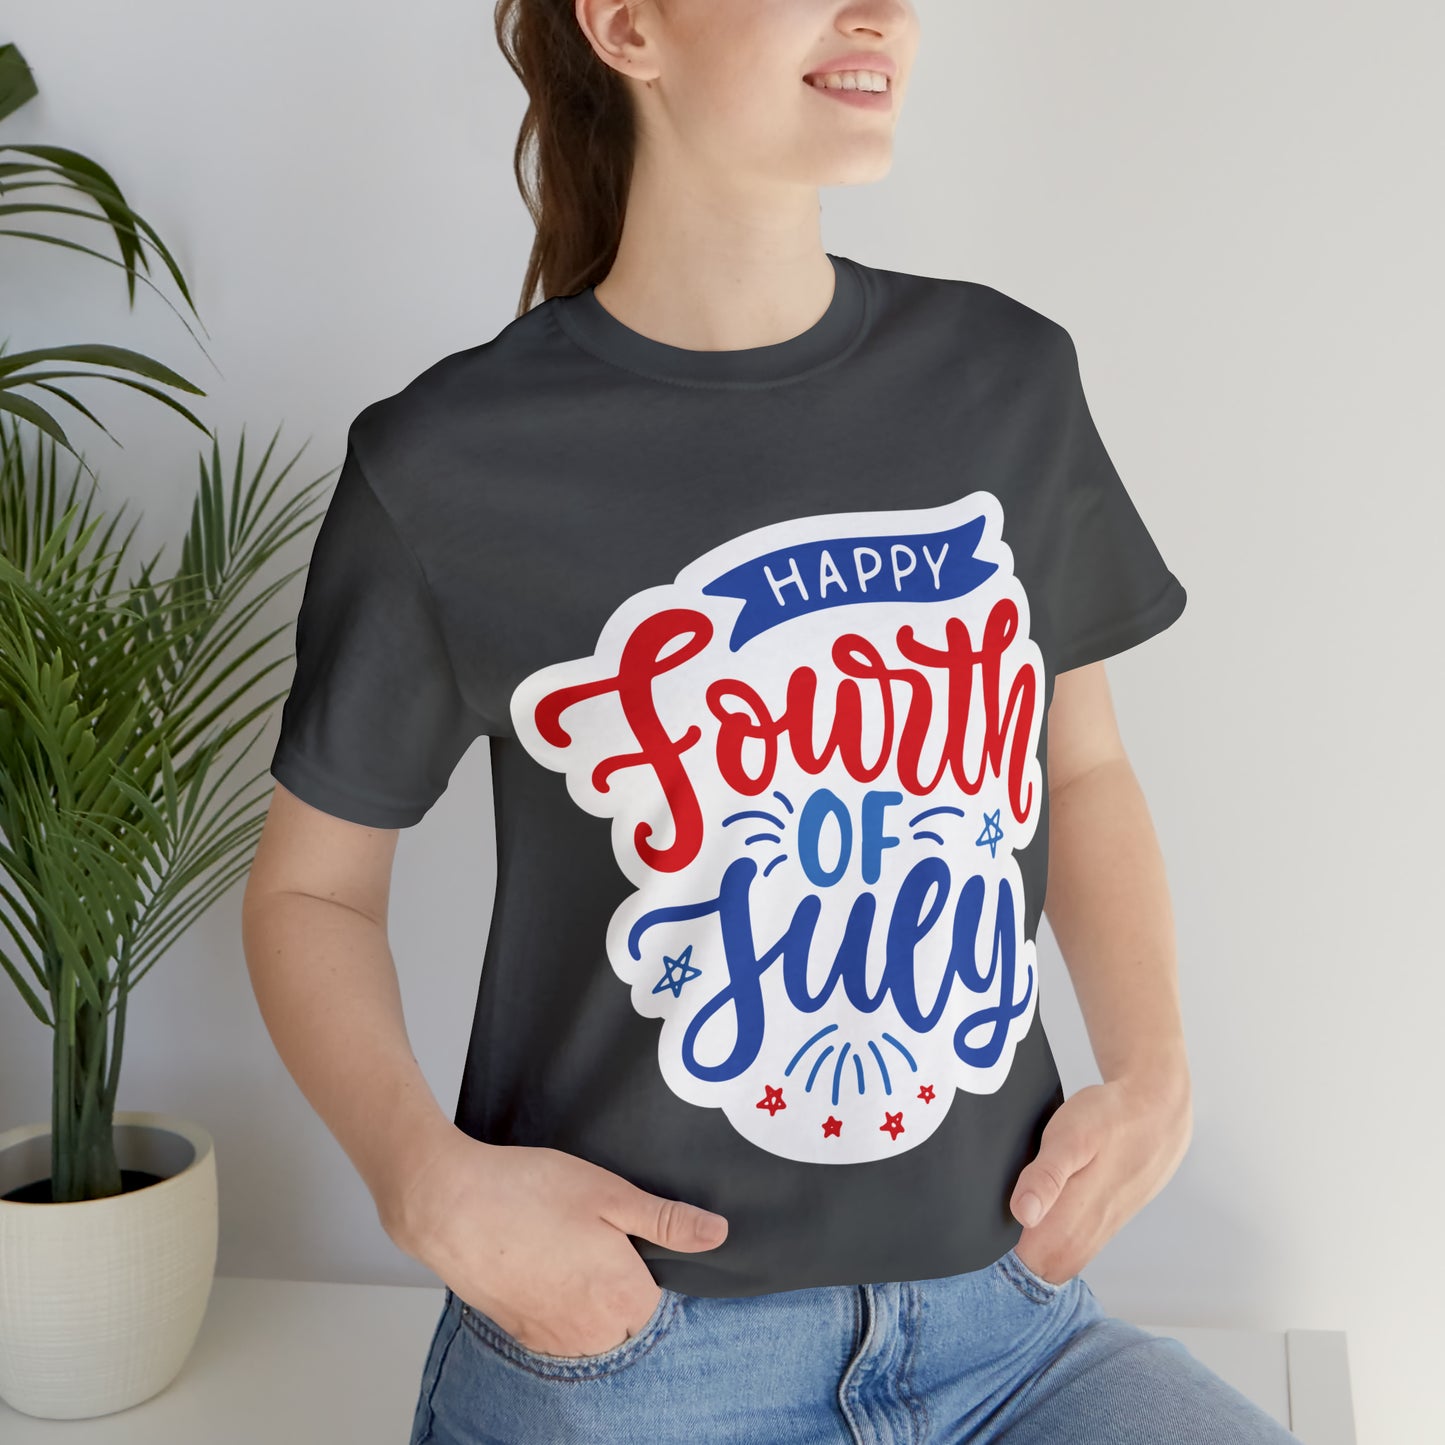 Asphalt T-Shirt Tshirt Design Gift for Friend and Family Short Sleeved Shirt July 4th Independence Day Petrova Designs